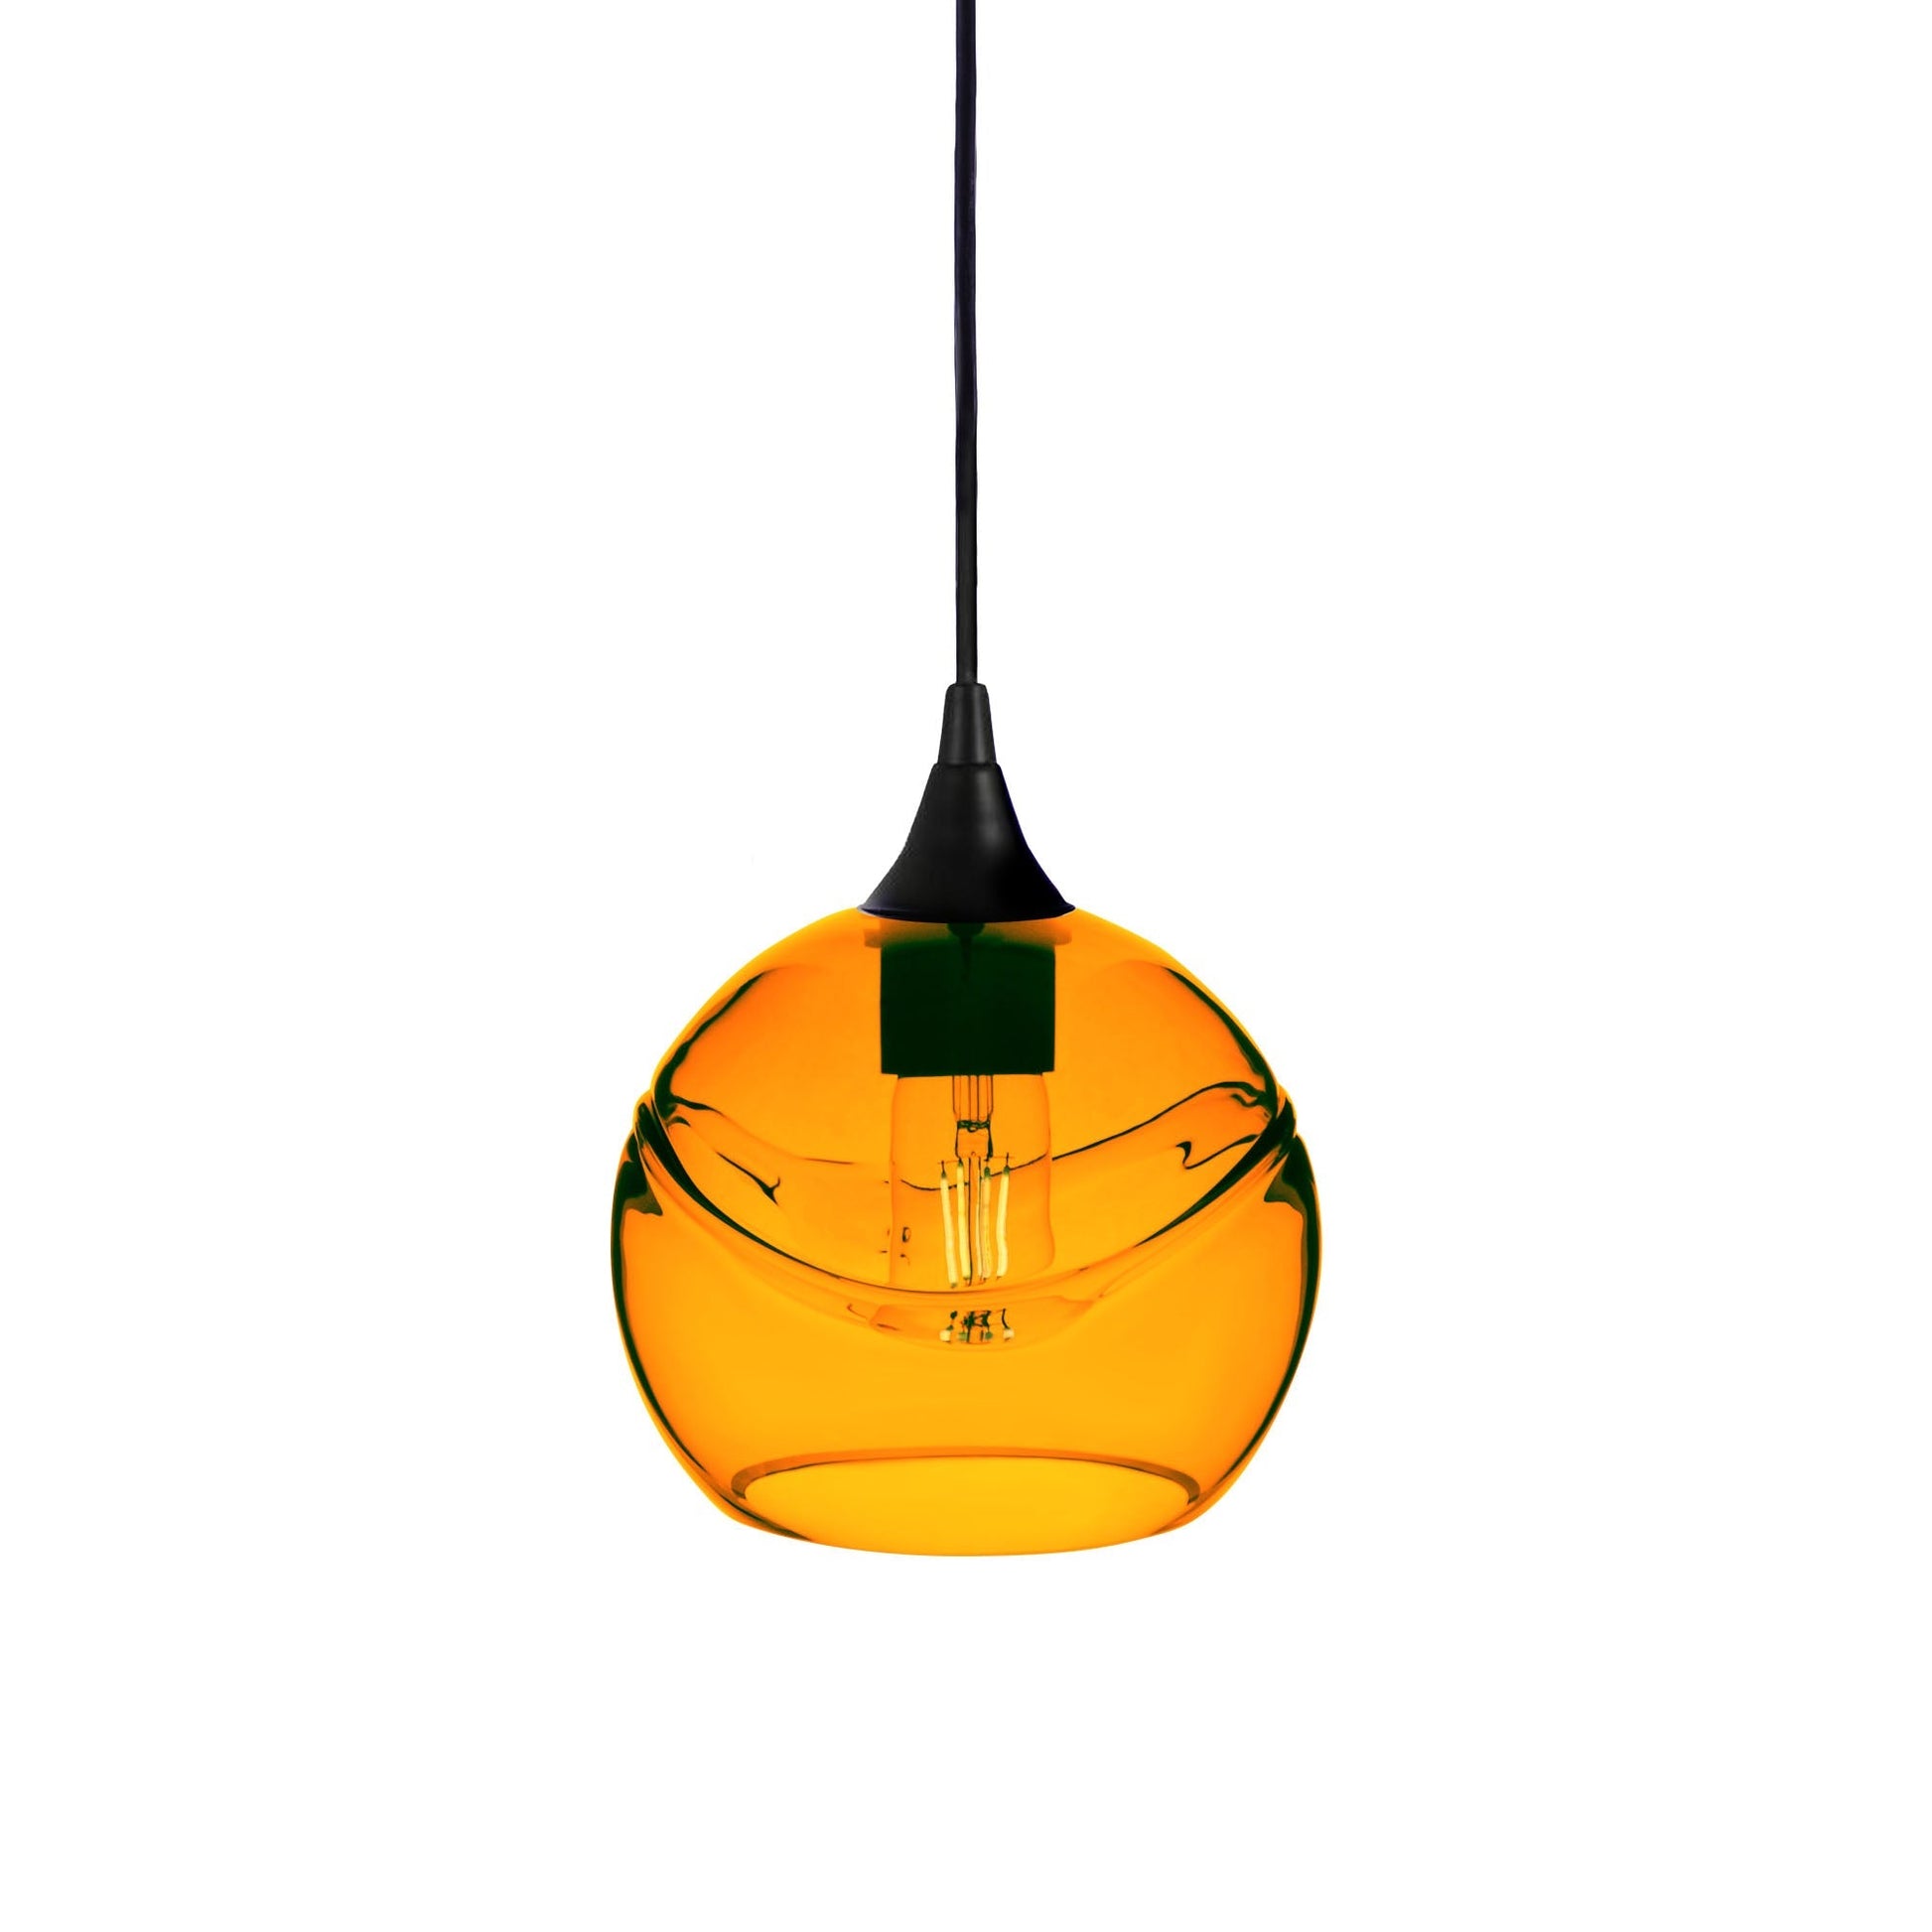 767 Swell: Single Pendant Light-Glass-Bicycle Glass Co - Hotshop-Harvest Gold-Matte Black-Bicycle Glass Co